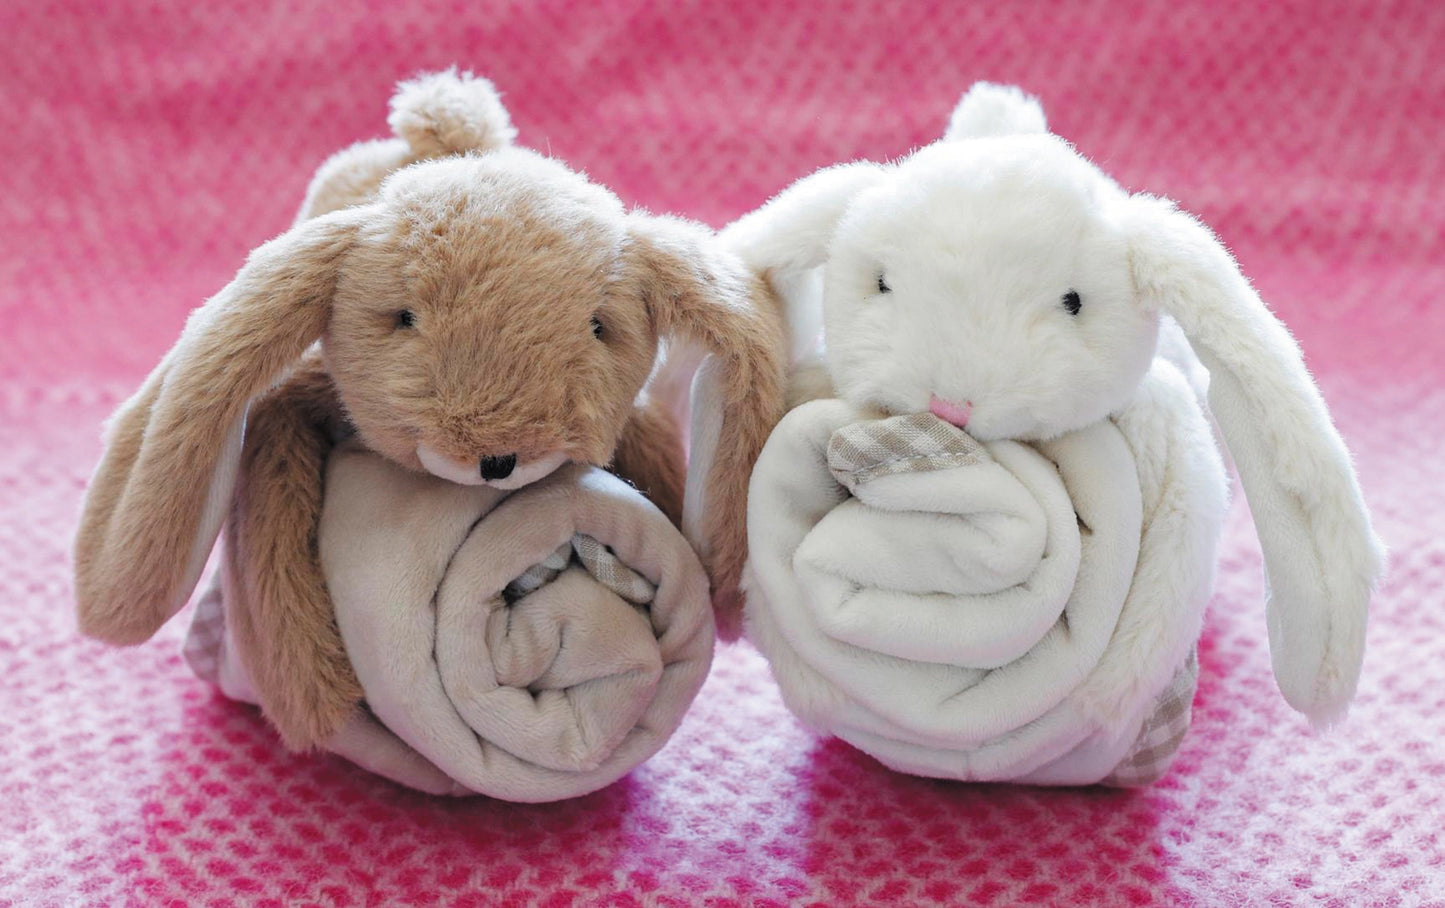 Copy of Bunny Baby Plush Soft Toy Soother Comforter Cream 29 X 29cm